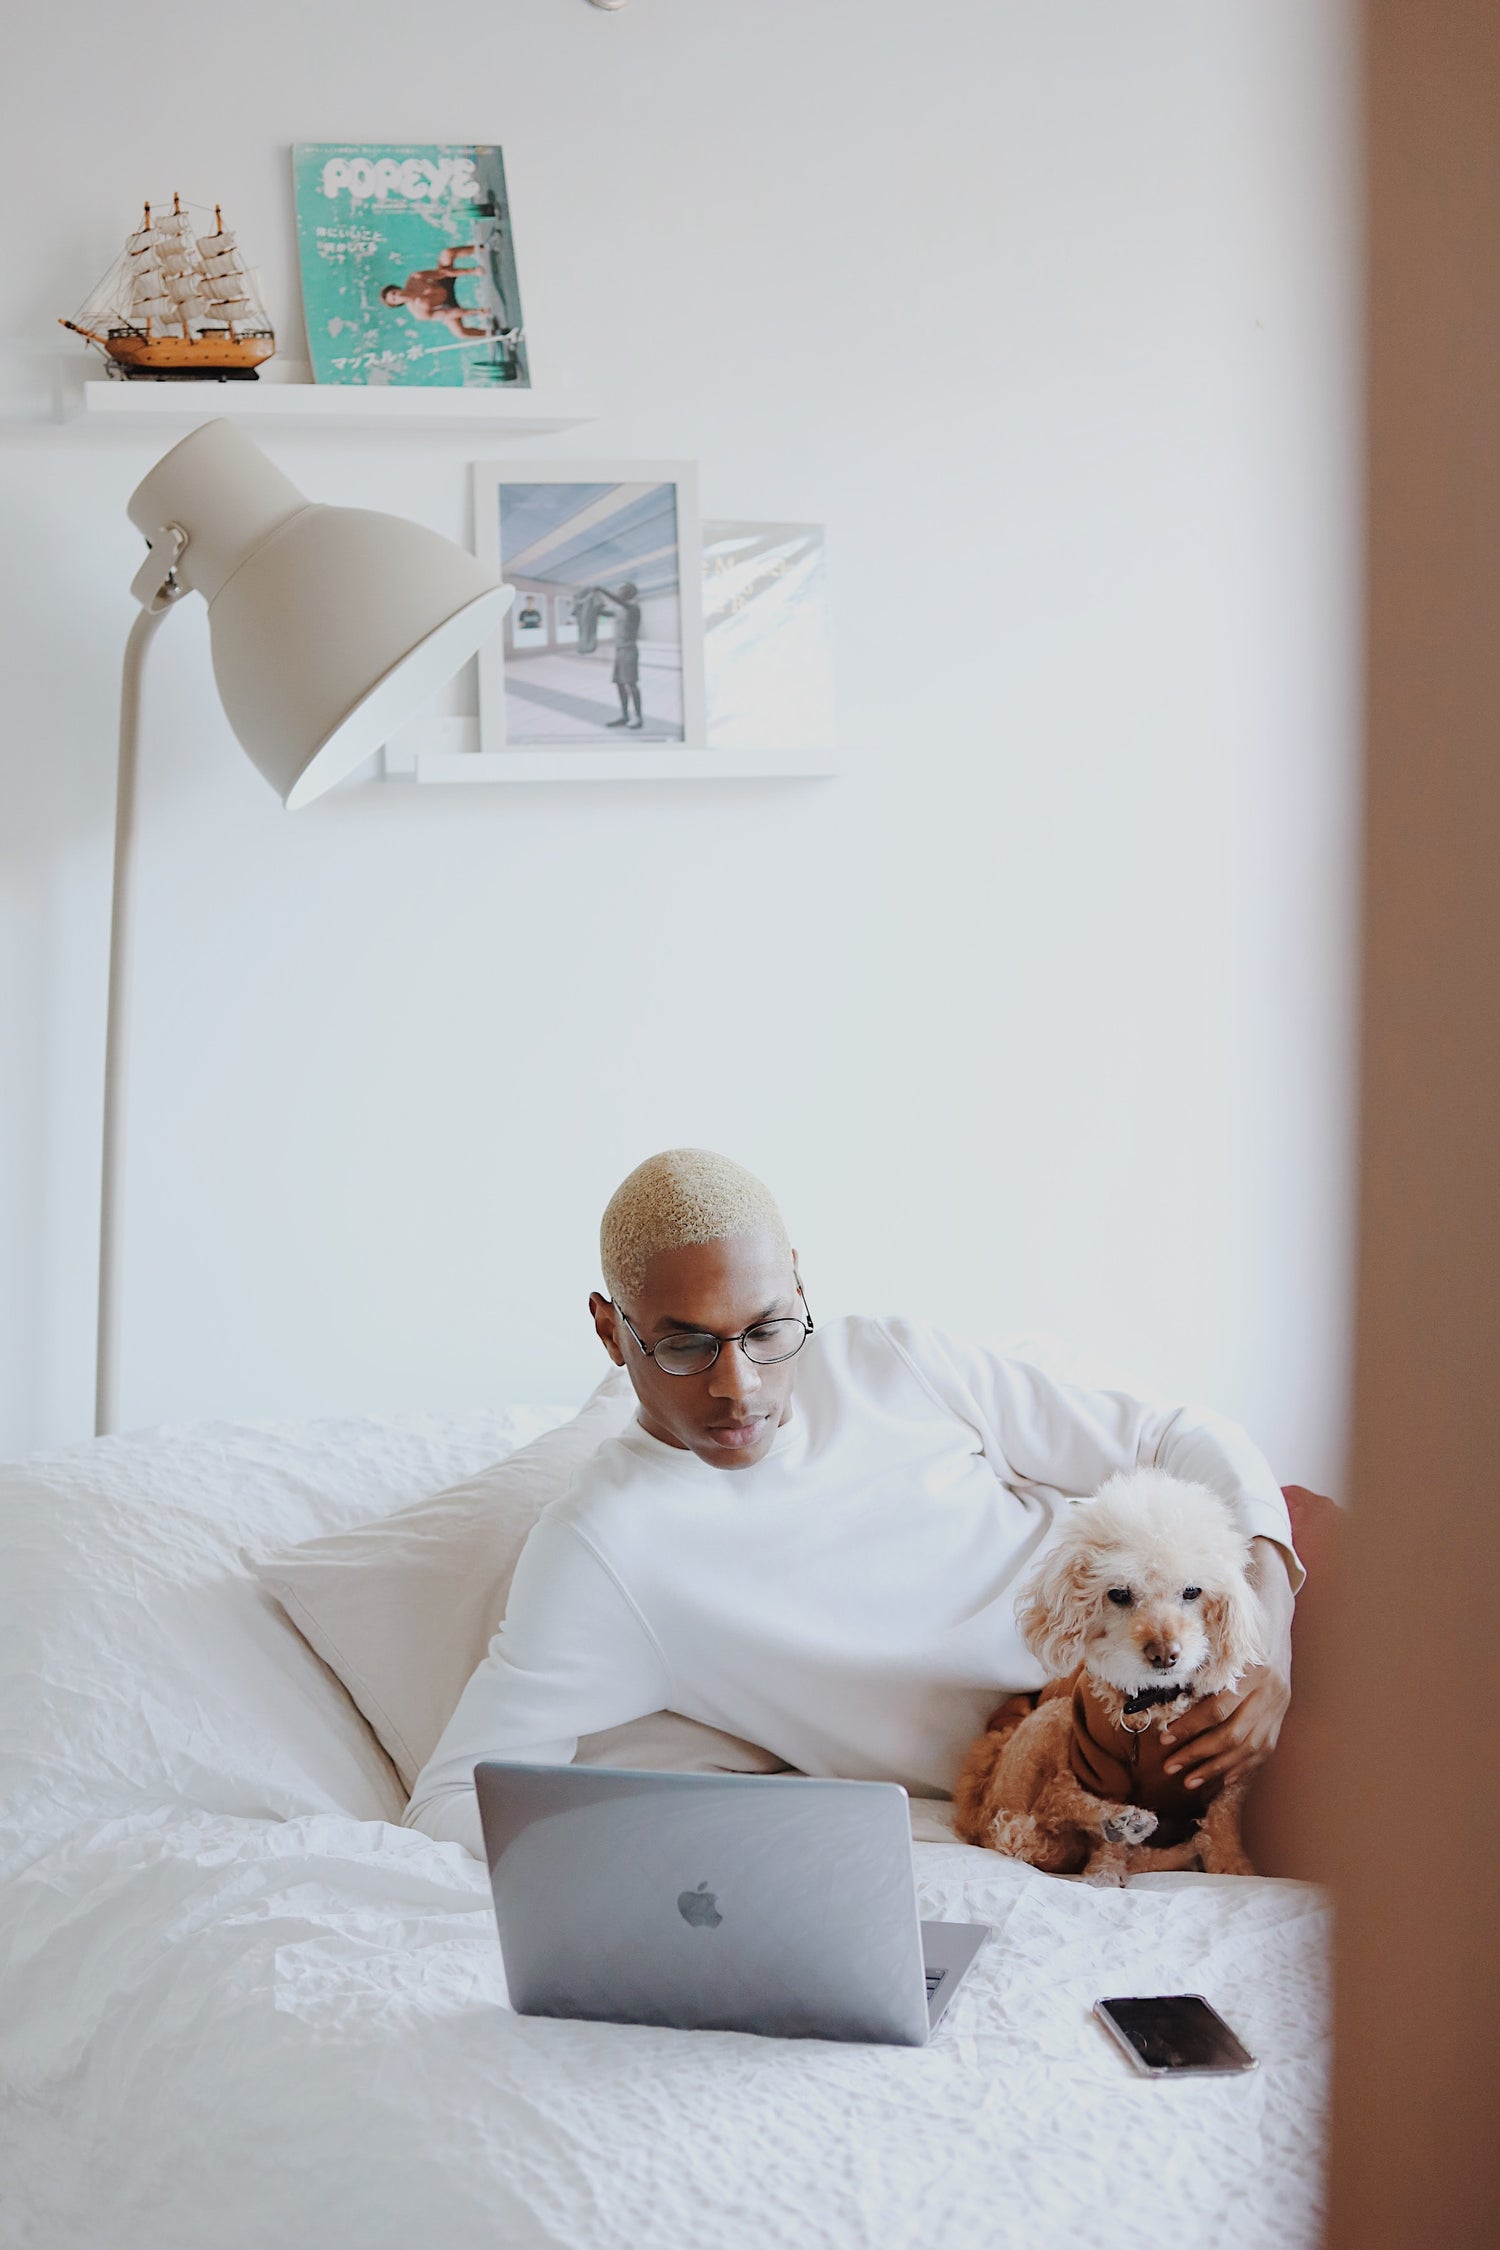 A Man Relaxing Focusing on Computer with a Dog